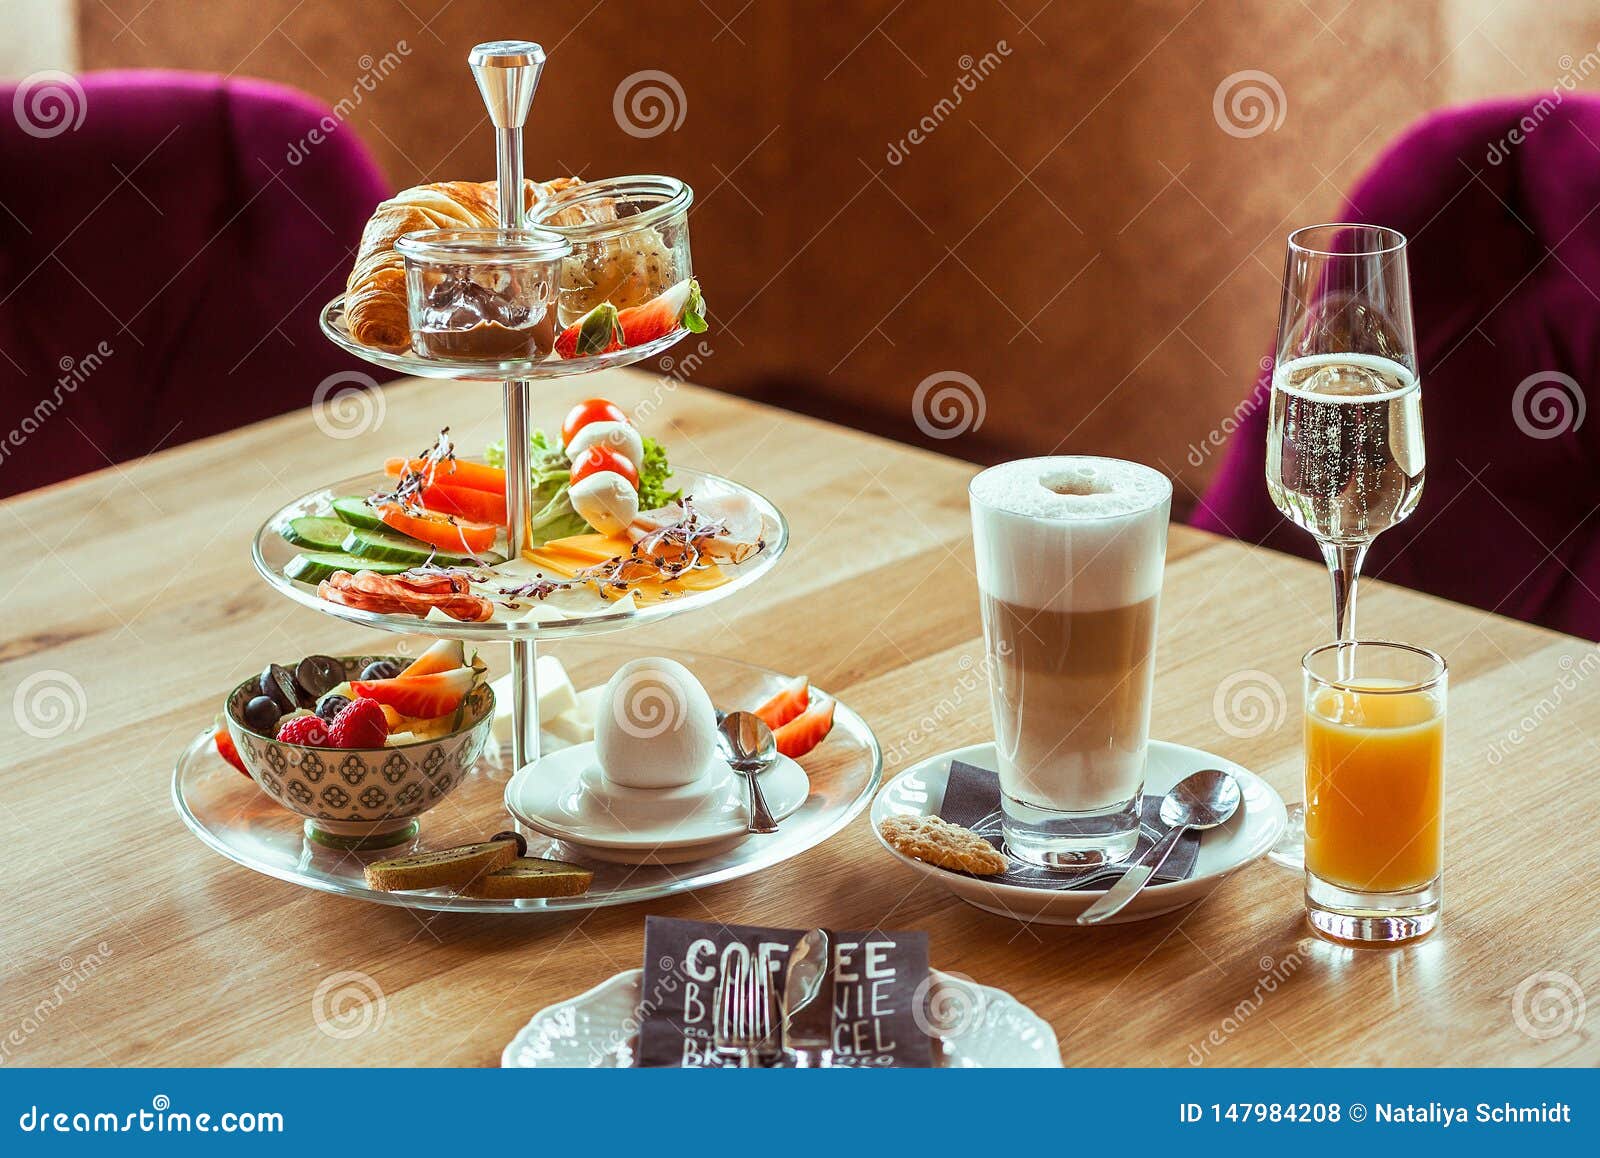 Assimilate truck Turkey Breakfast in the Hotel. Table Setting Stock Photo - Image of delicious,  plate: 147984208